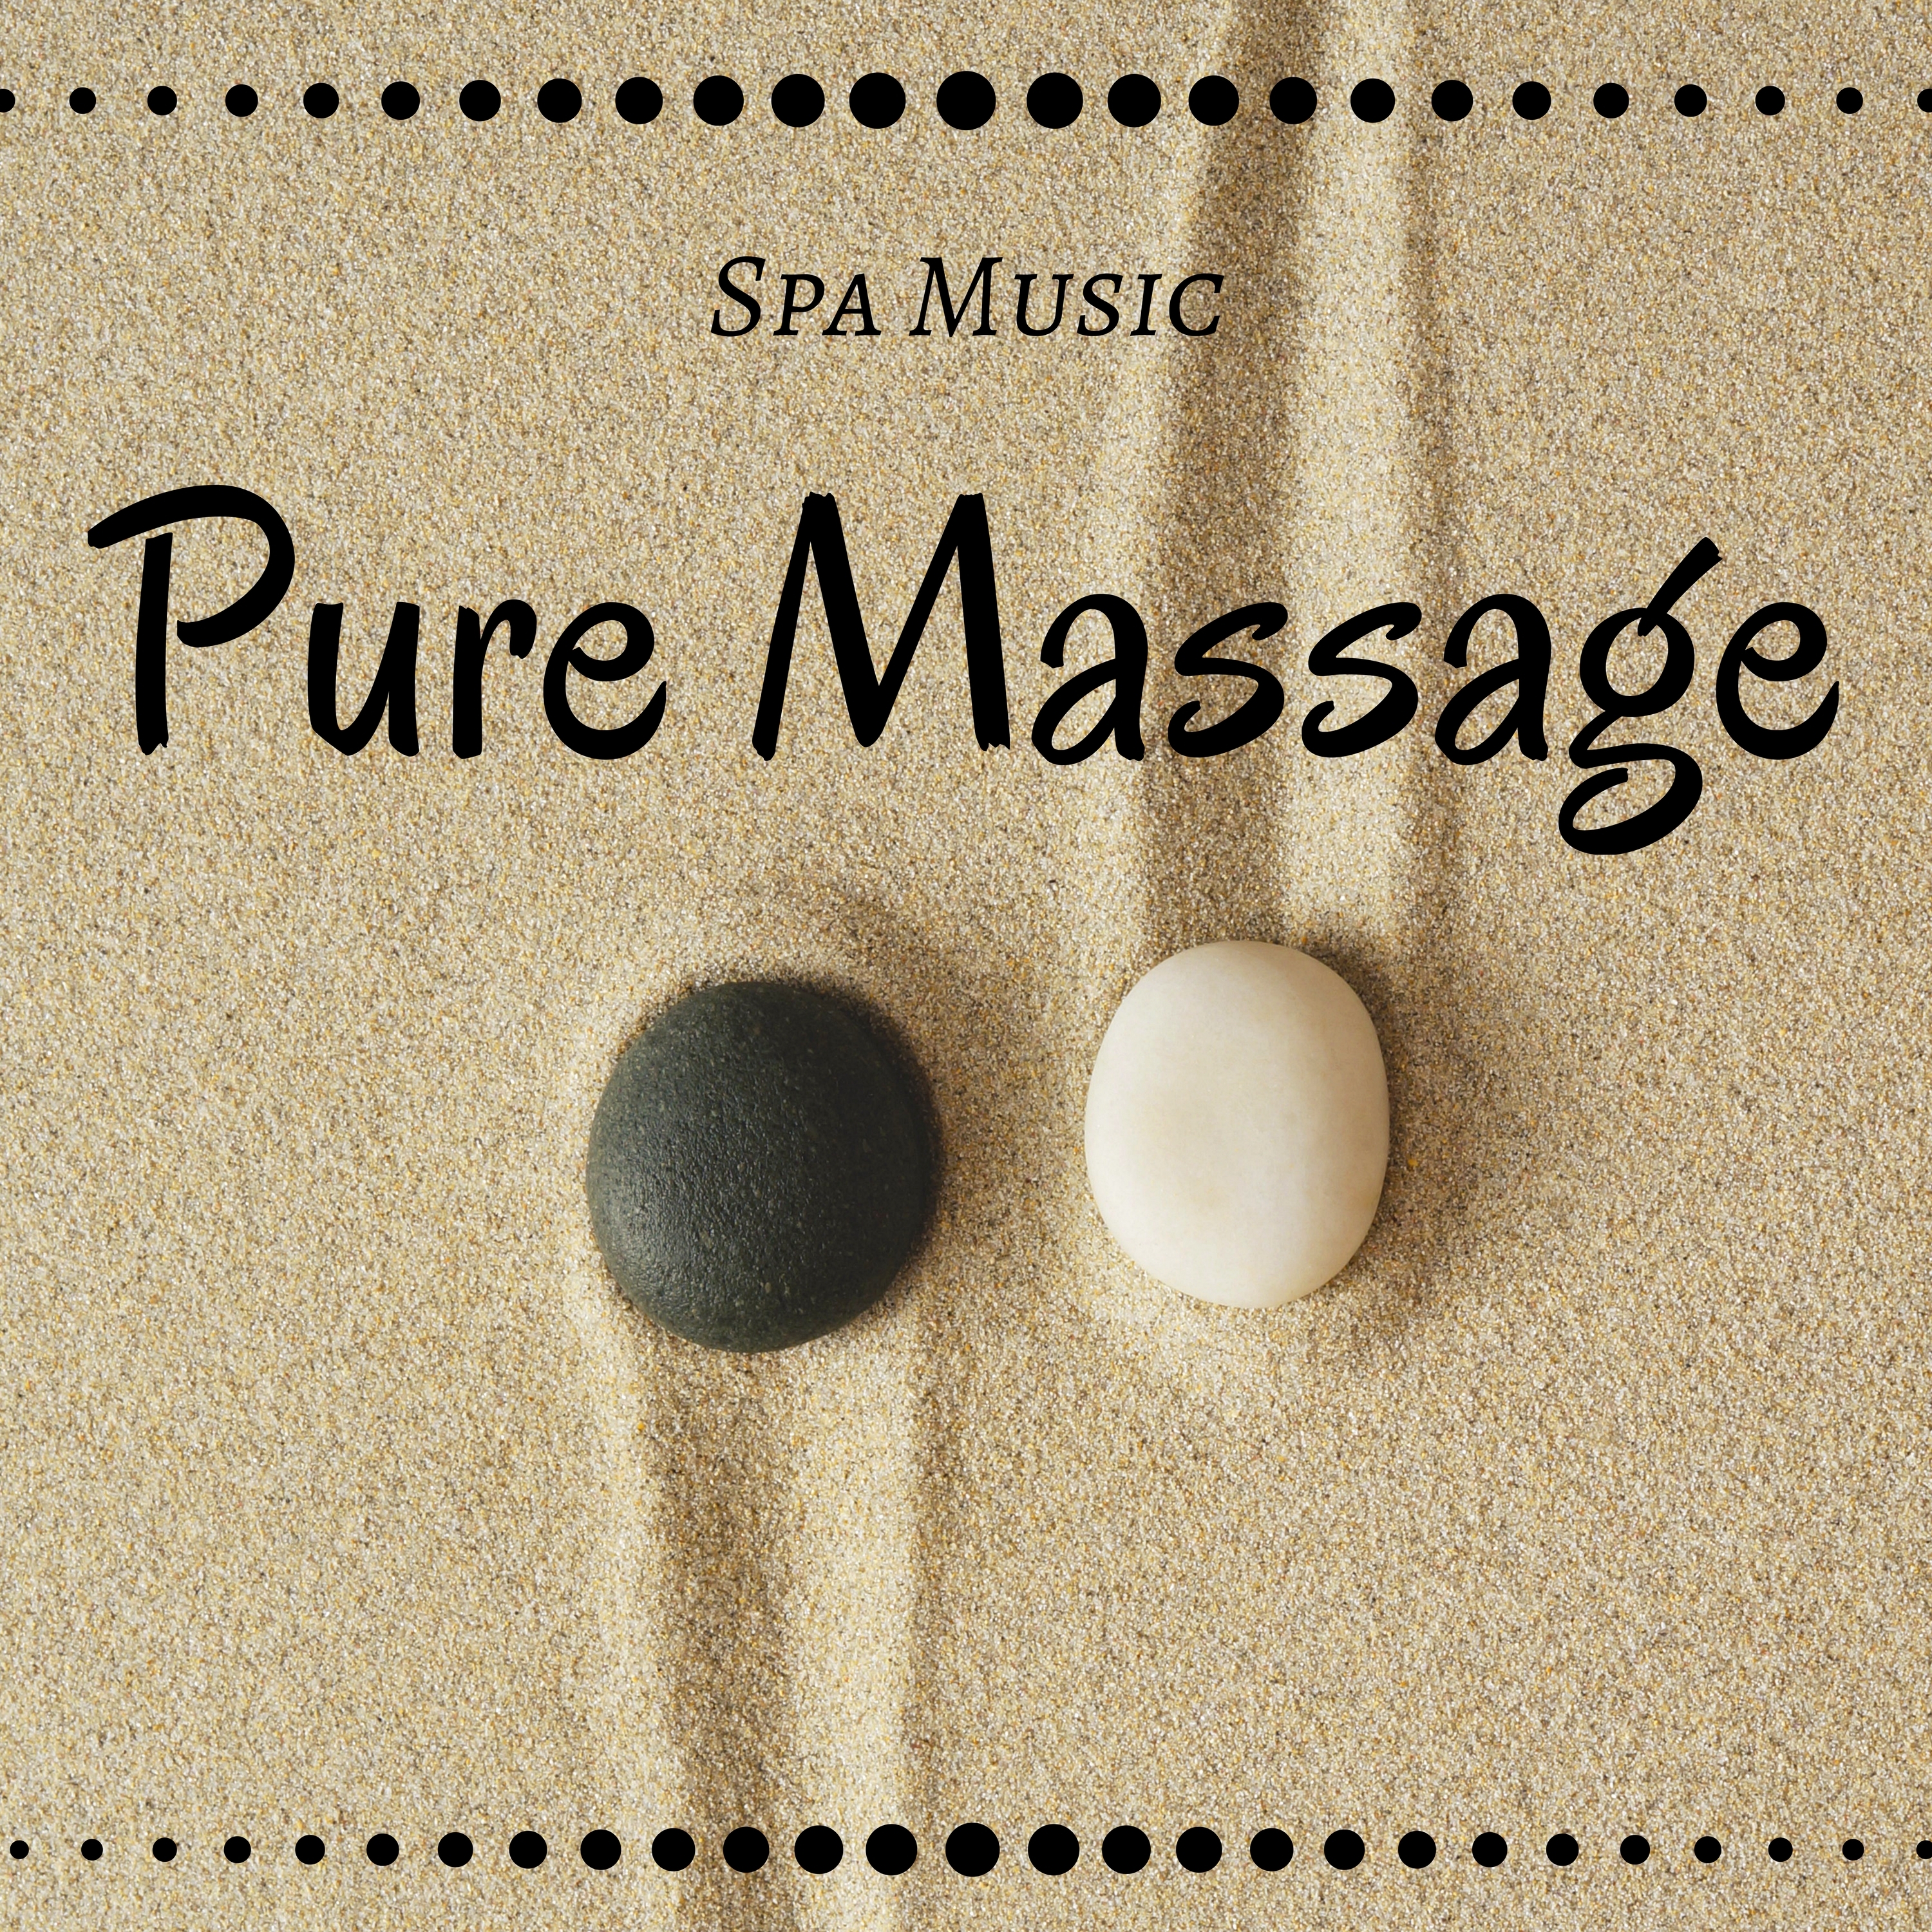 Pure Massage: Spa Music, Calmness & Serenity, Tranquil Time with the Best Nature Sounds and Piano Music